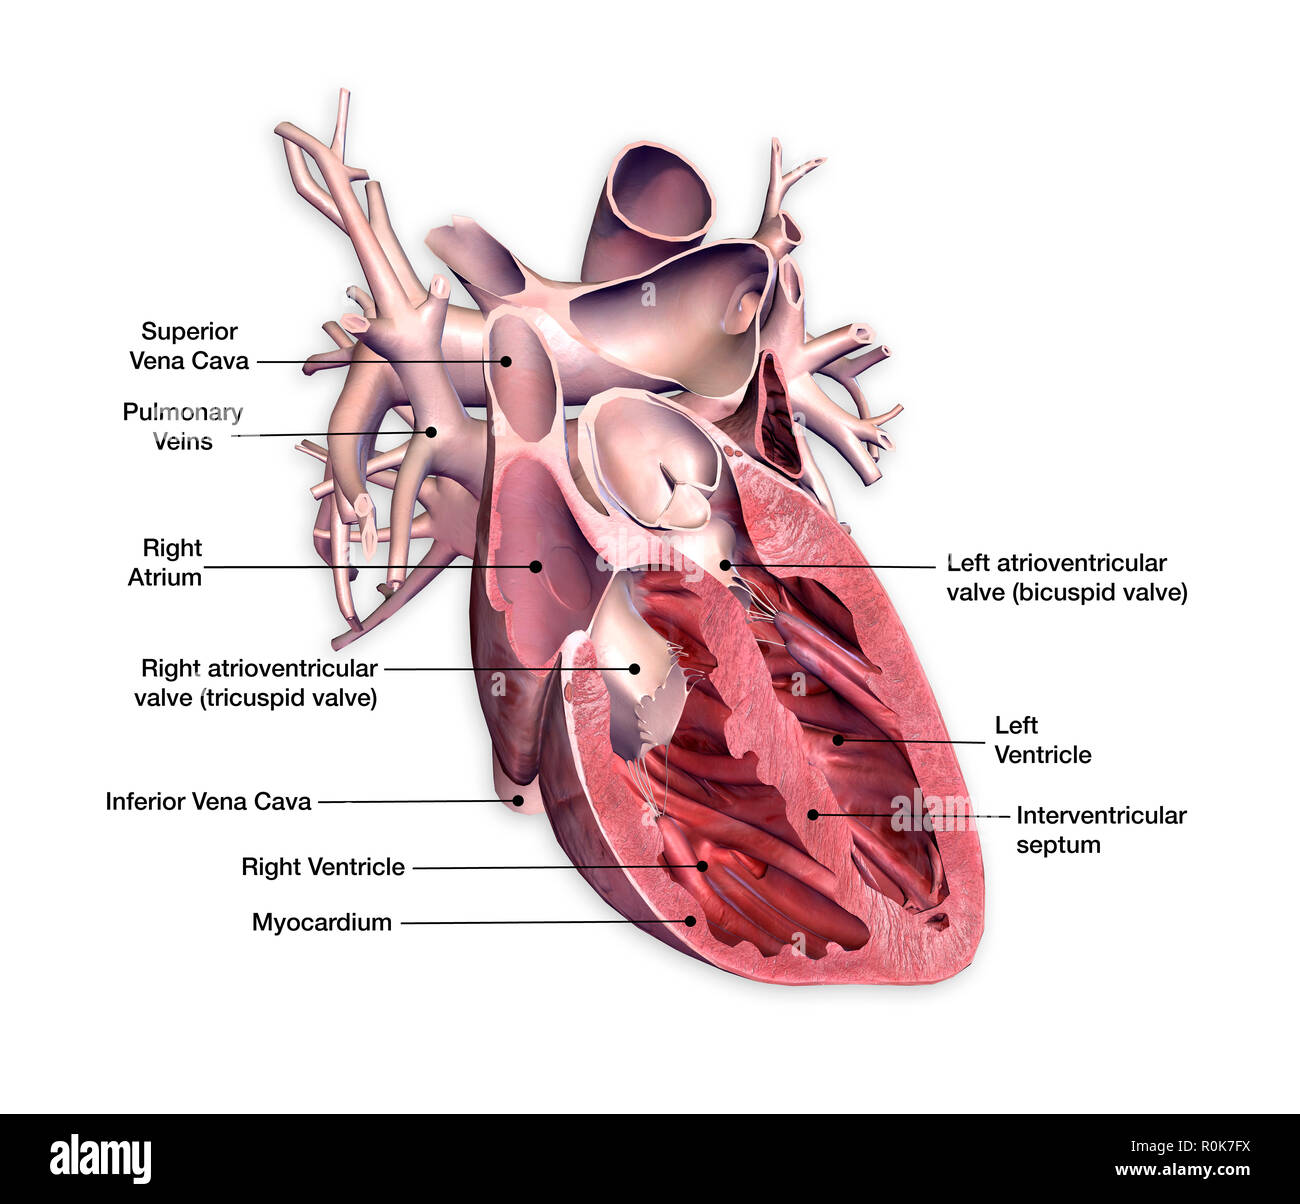 Human Heart Dissection High Resolution Stock Photography and Images - Alamy